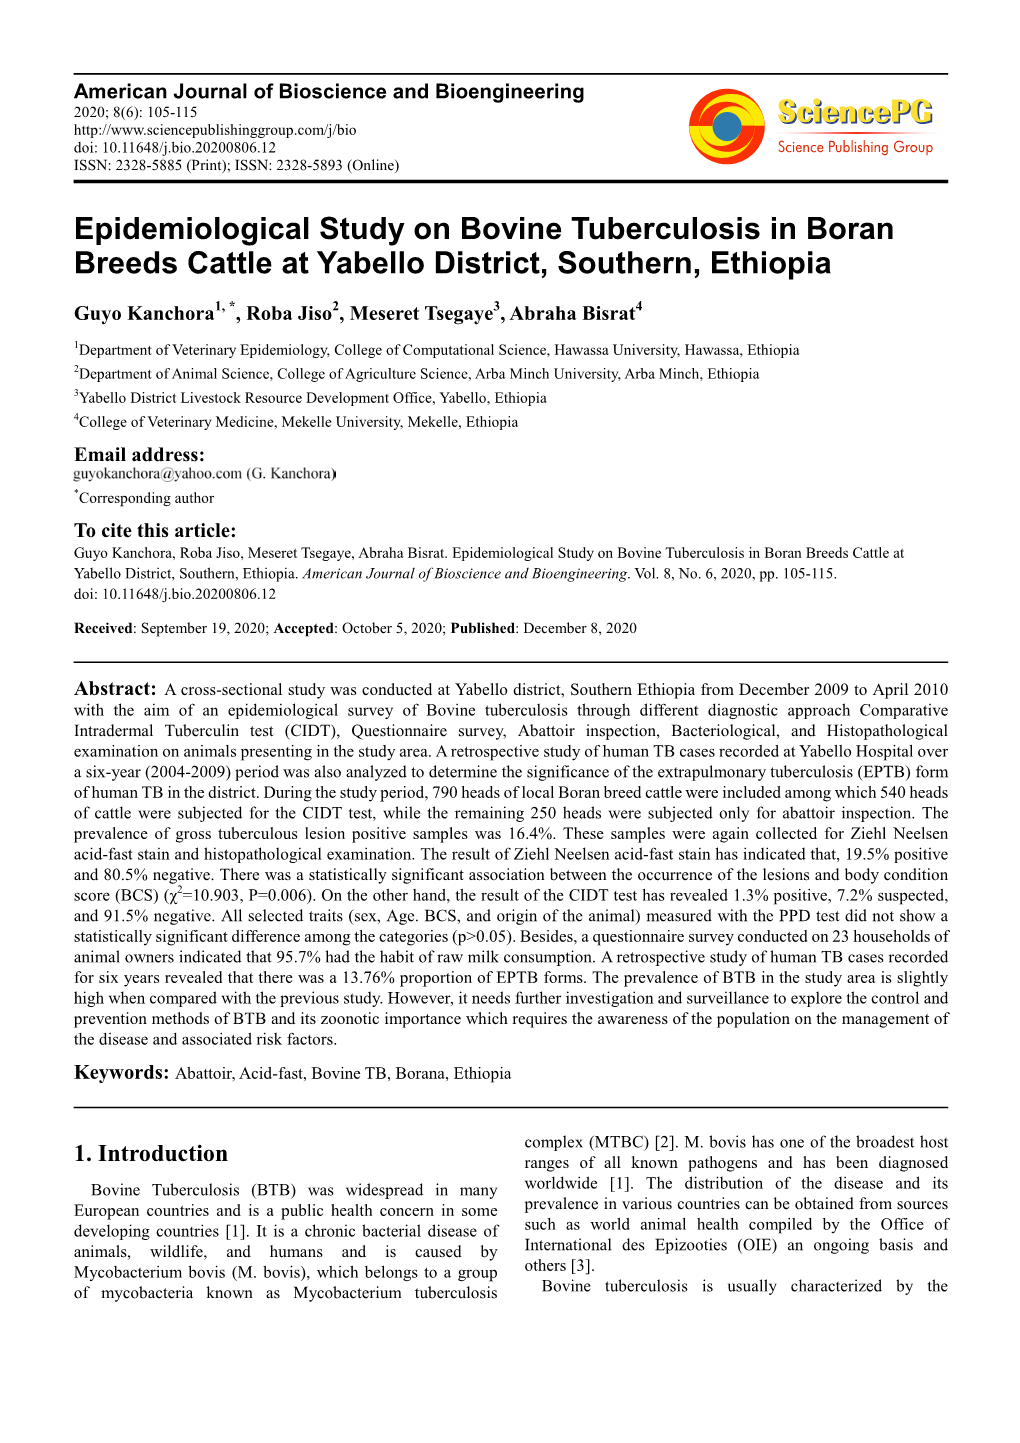 Epidemiological Study on Bovine Tuberculosis in Boran Breeds Cattle at Yabello District, Southern, Ethiopia